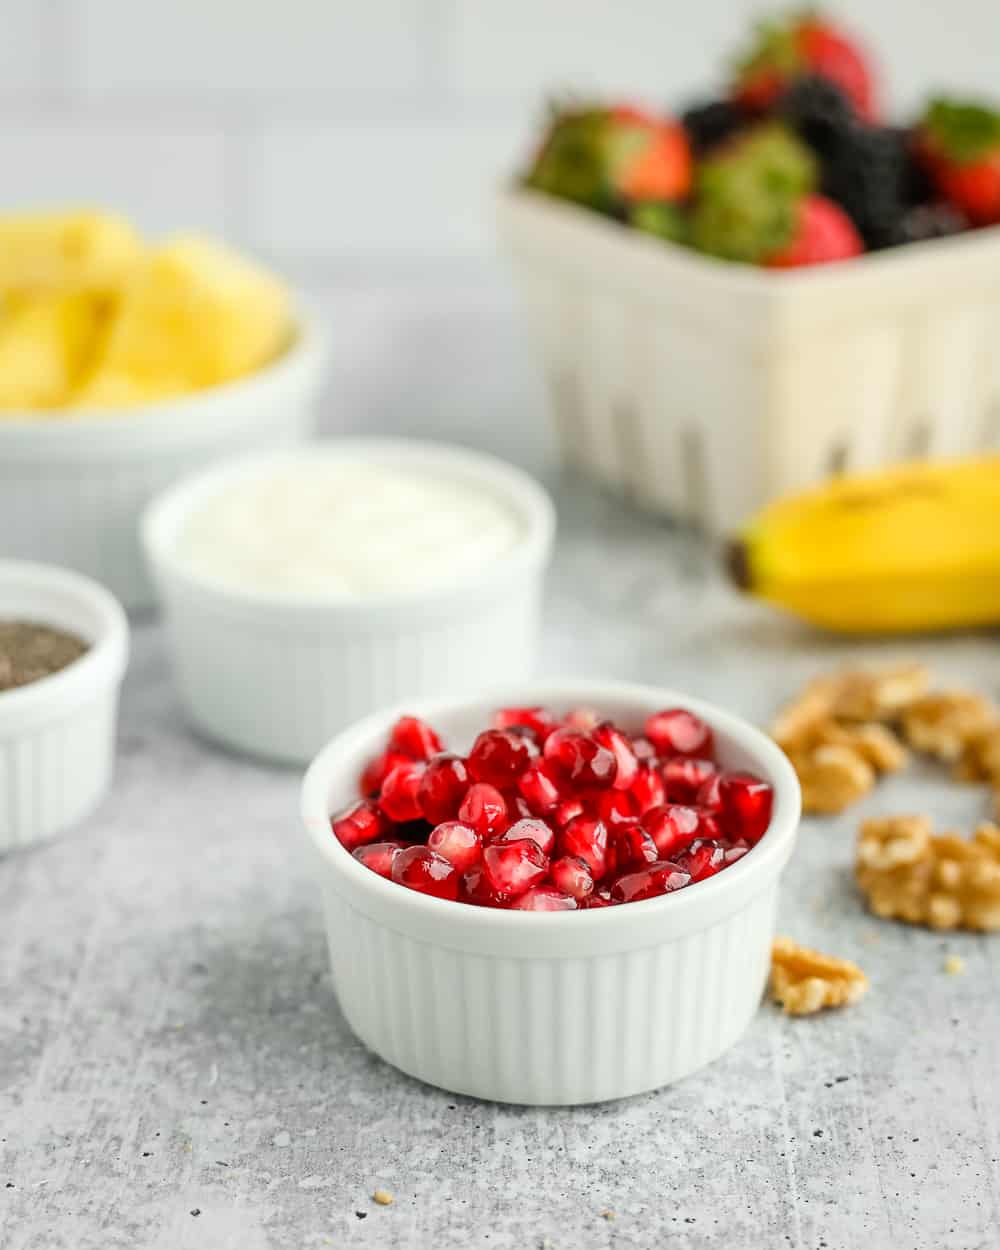 A small white ramekin filled with fresh pomegranate arils with other fresh fruit salad ingredients in the background